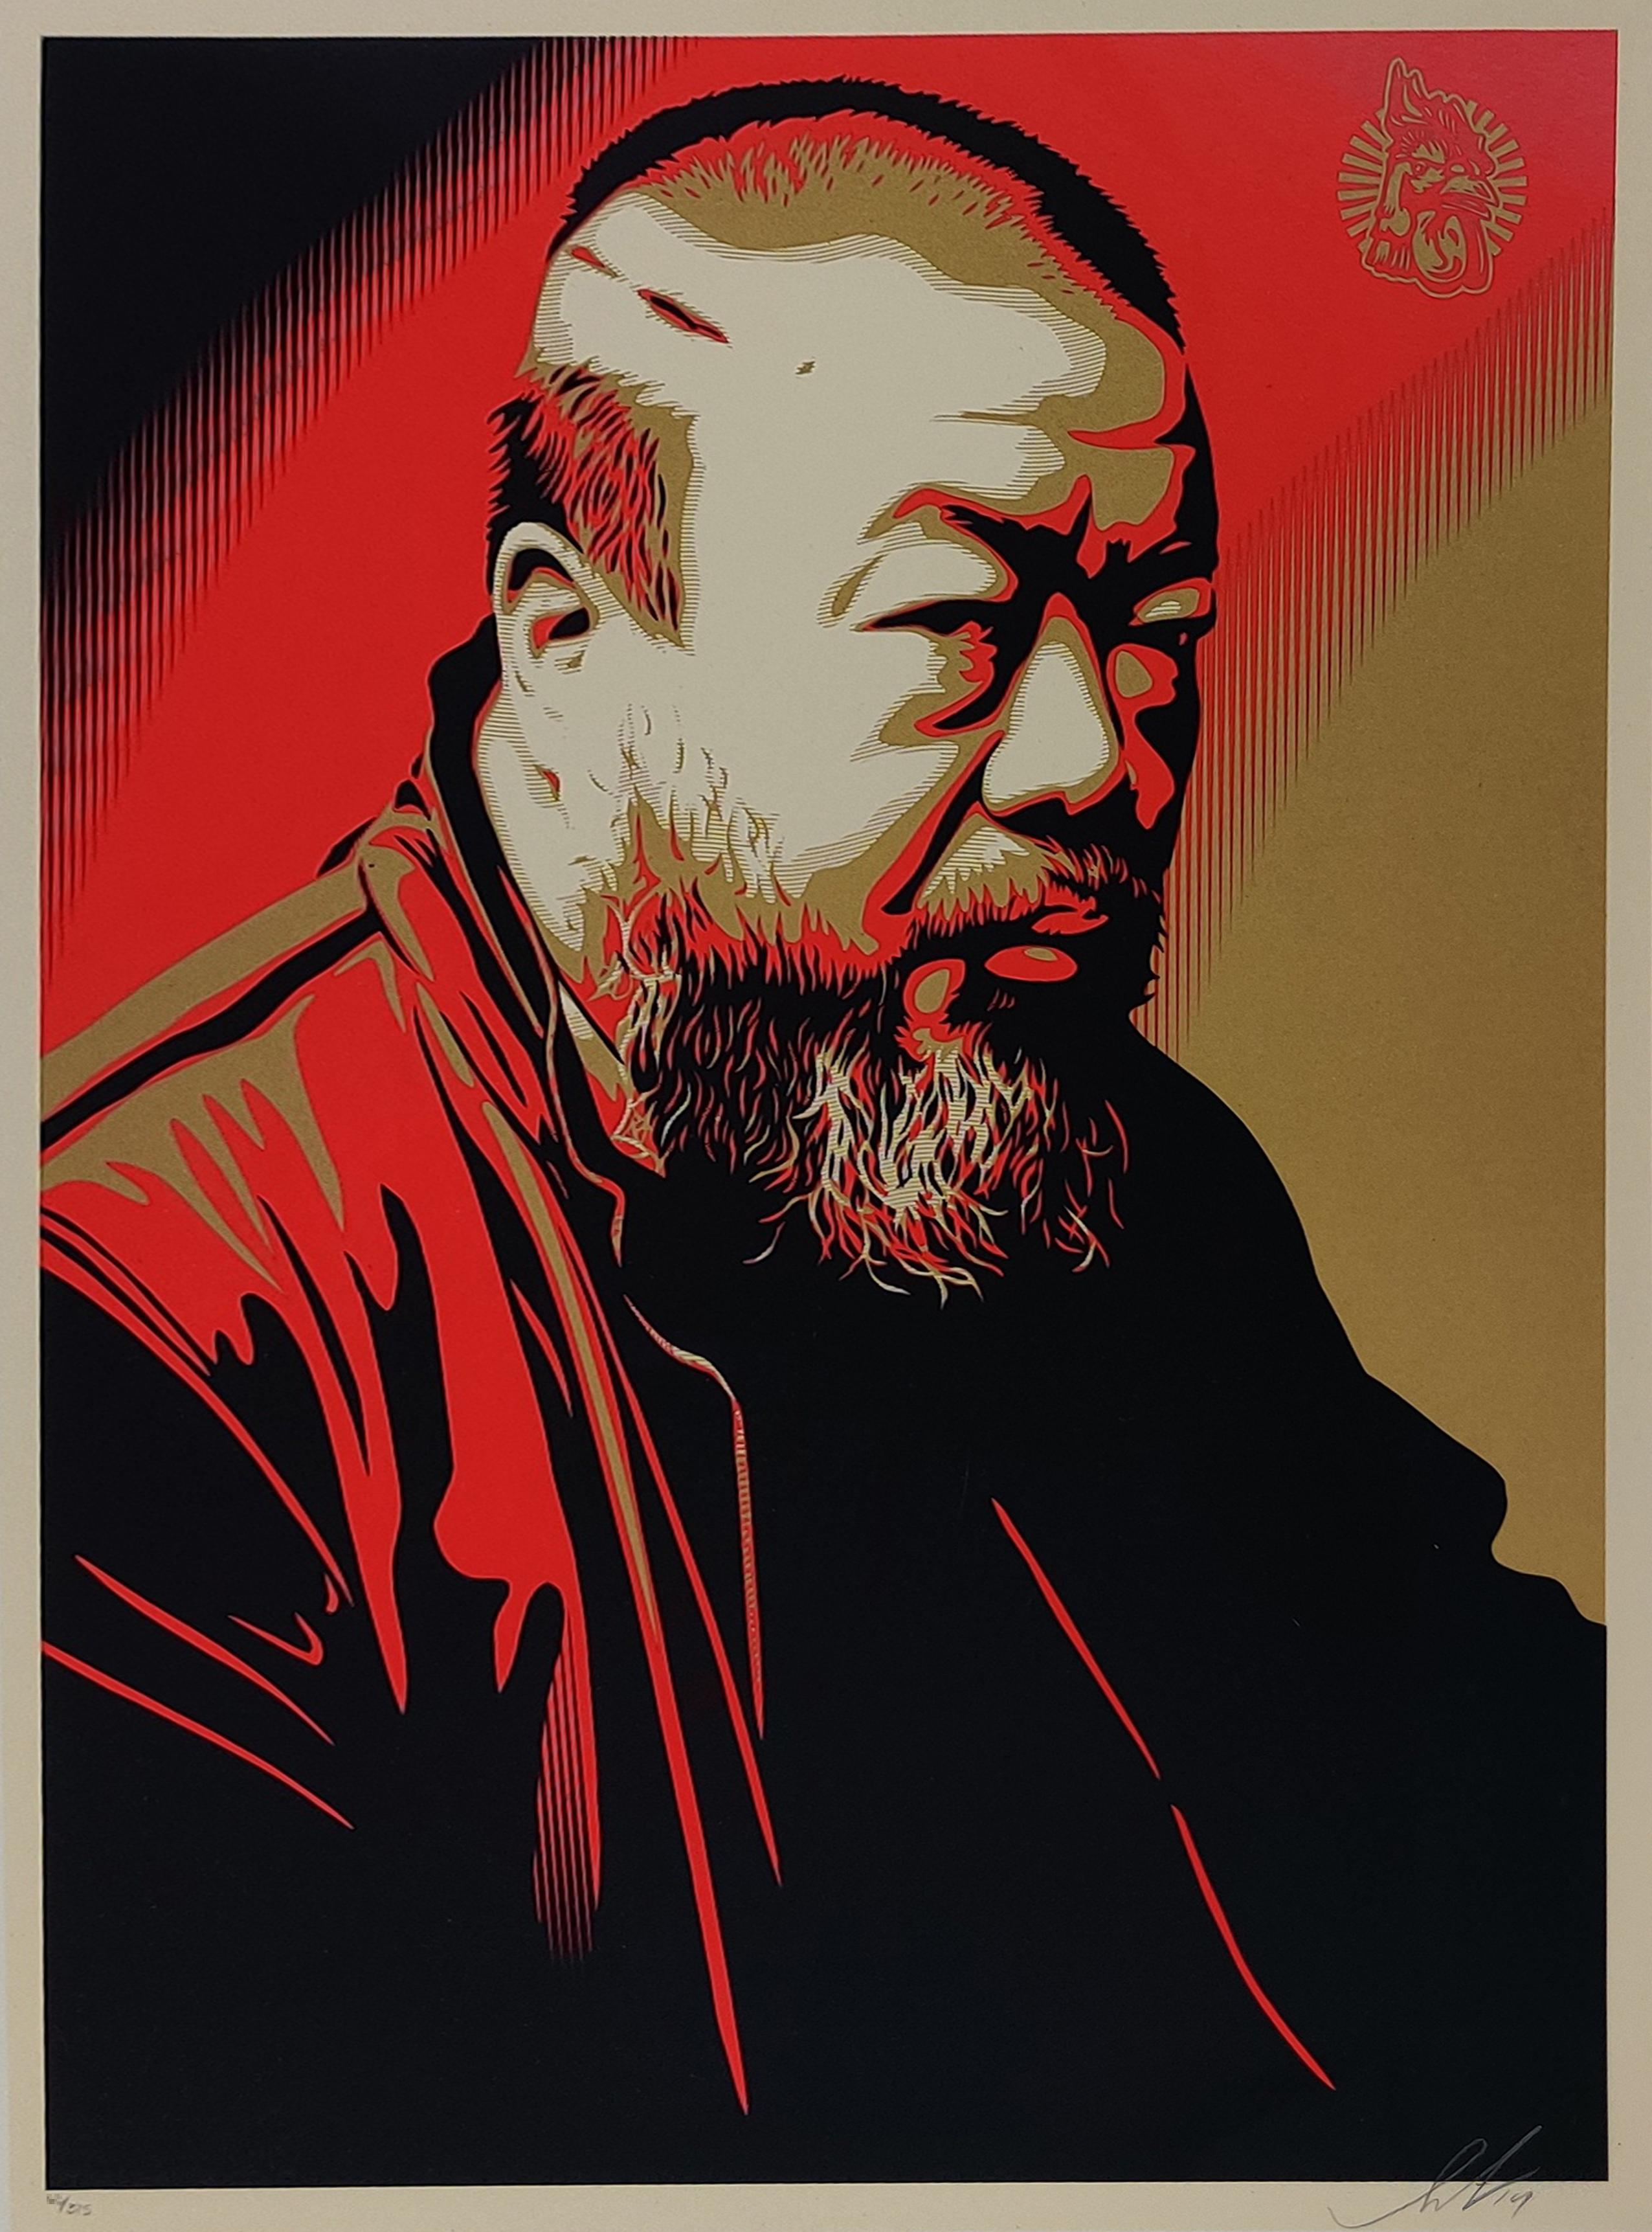 AI WEIWEI X COST OF EXPRESSION PRINT - Print by Shepard Fairey